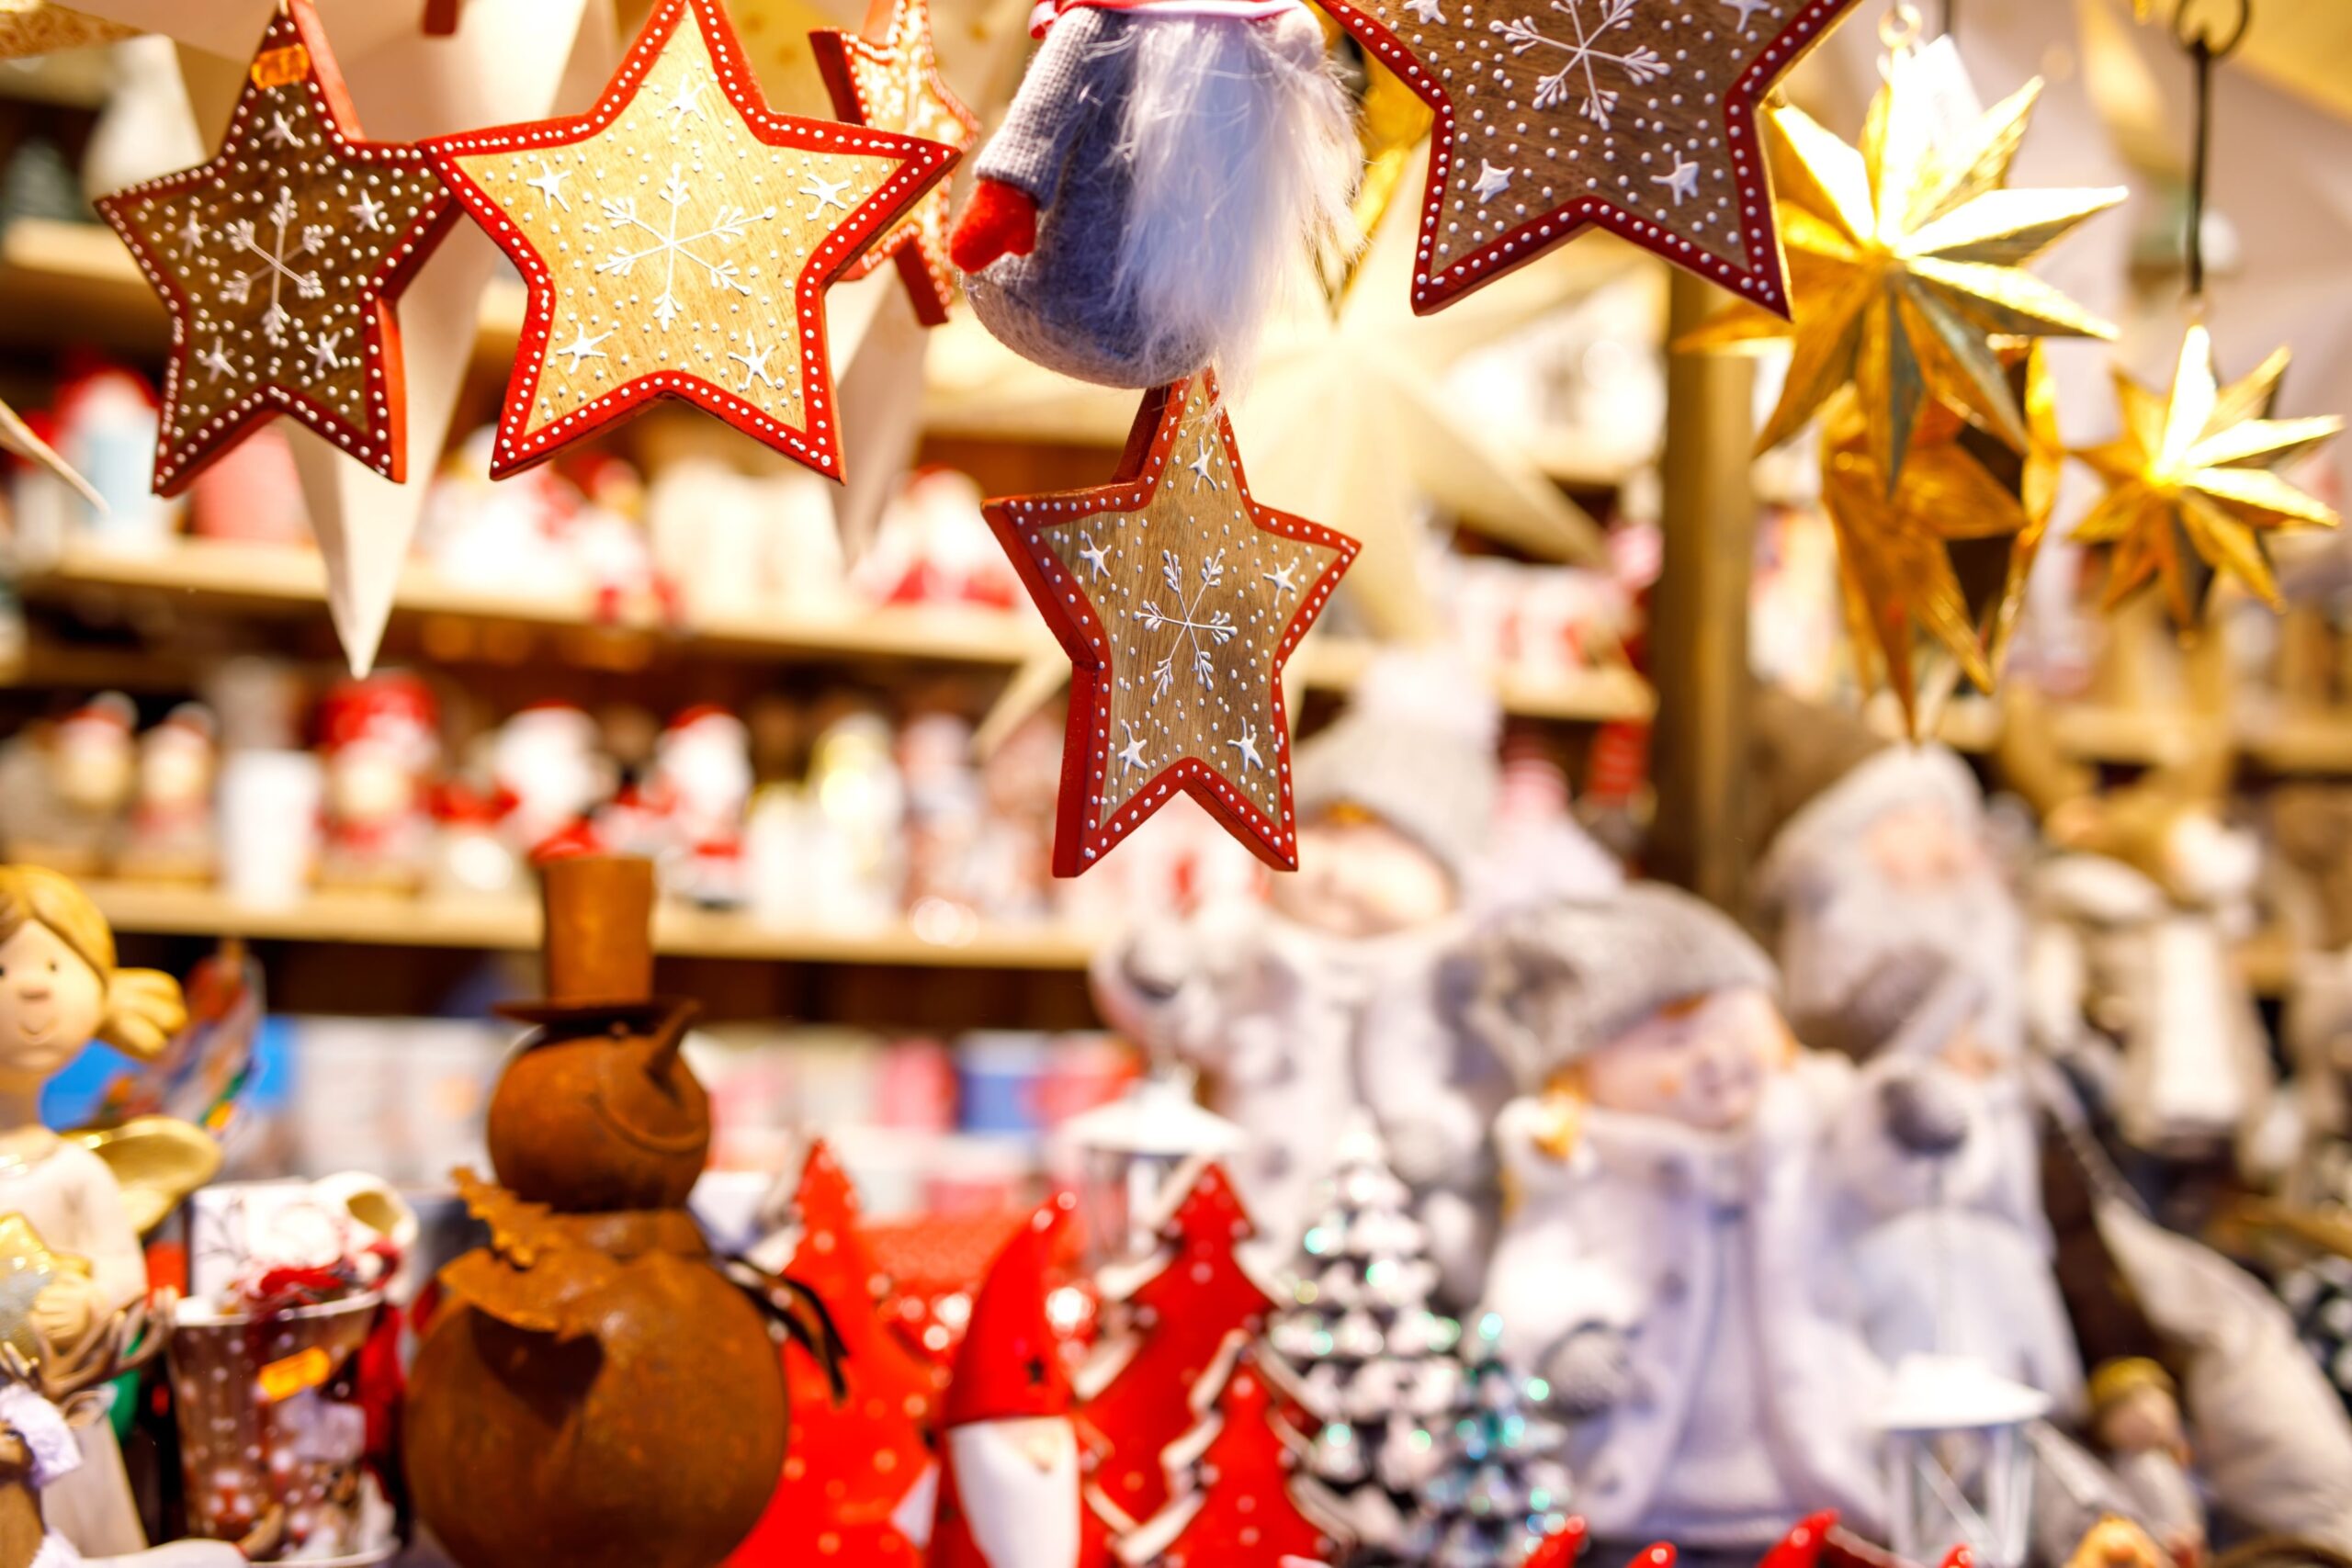 Get In The Holiday Spirit At Our Cozy Christmas Decor Shop!